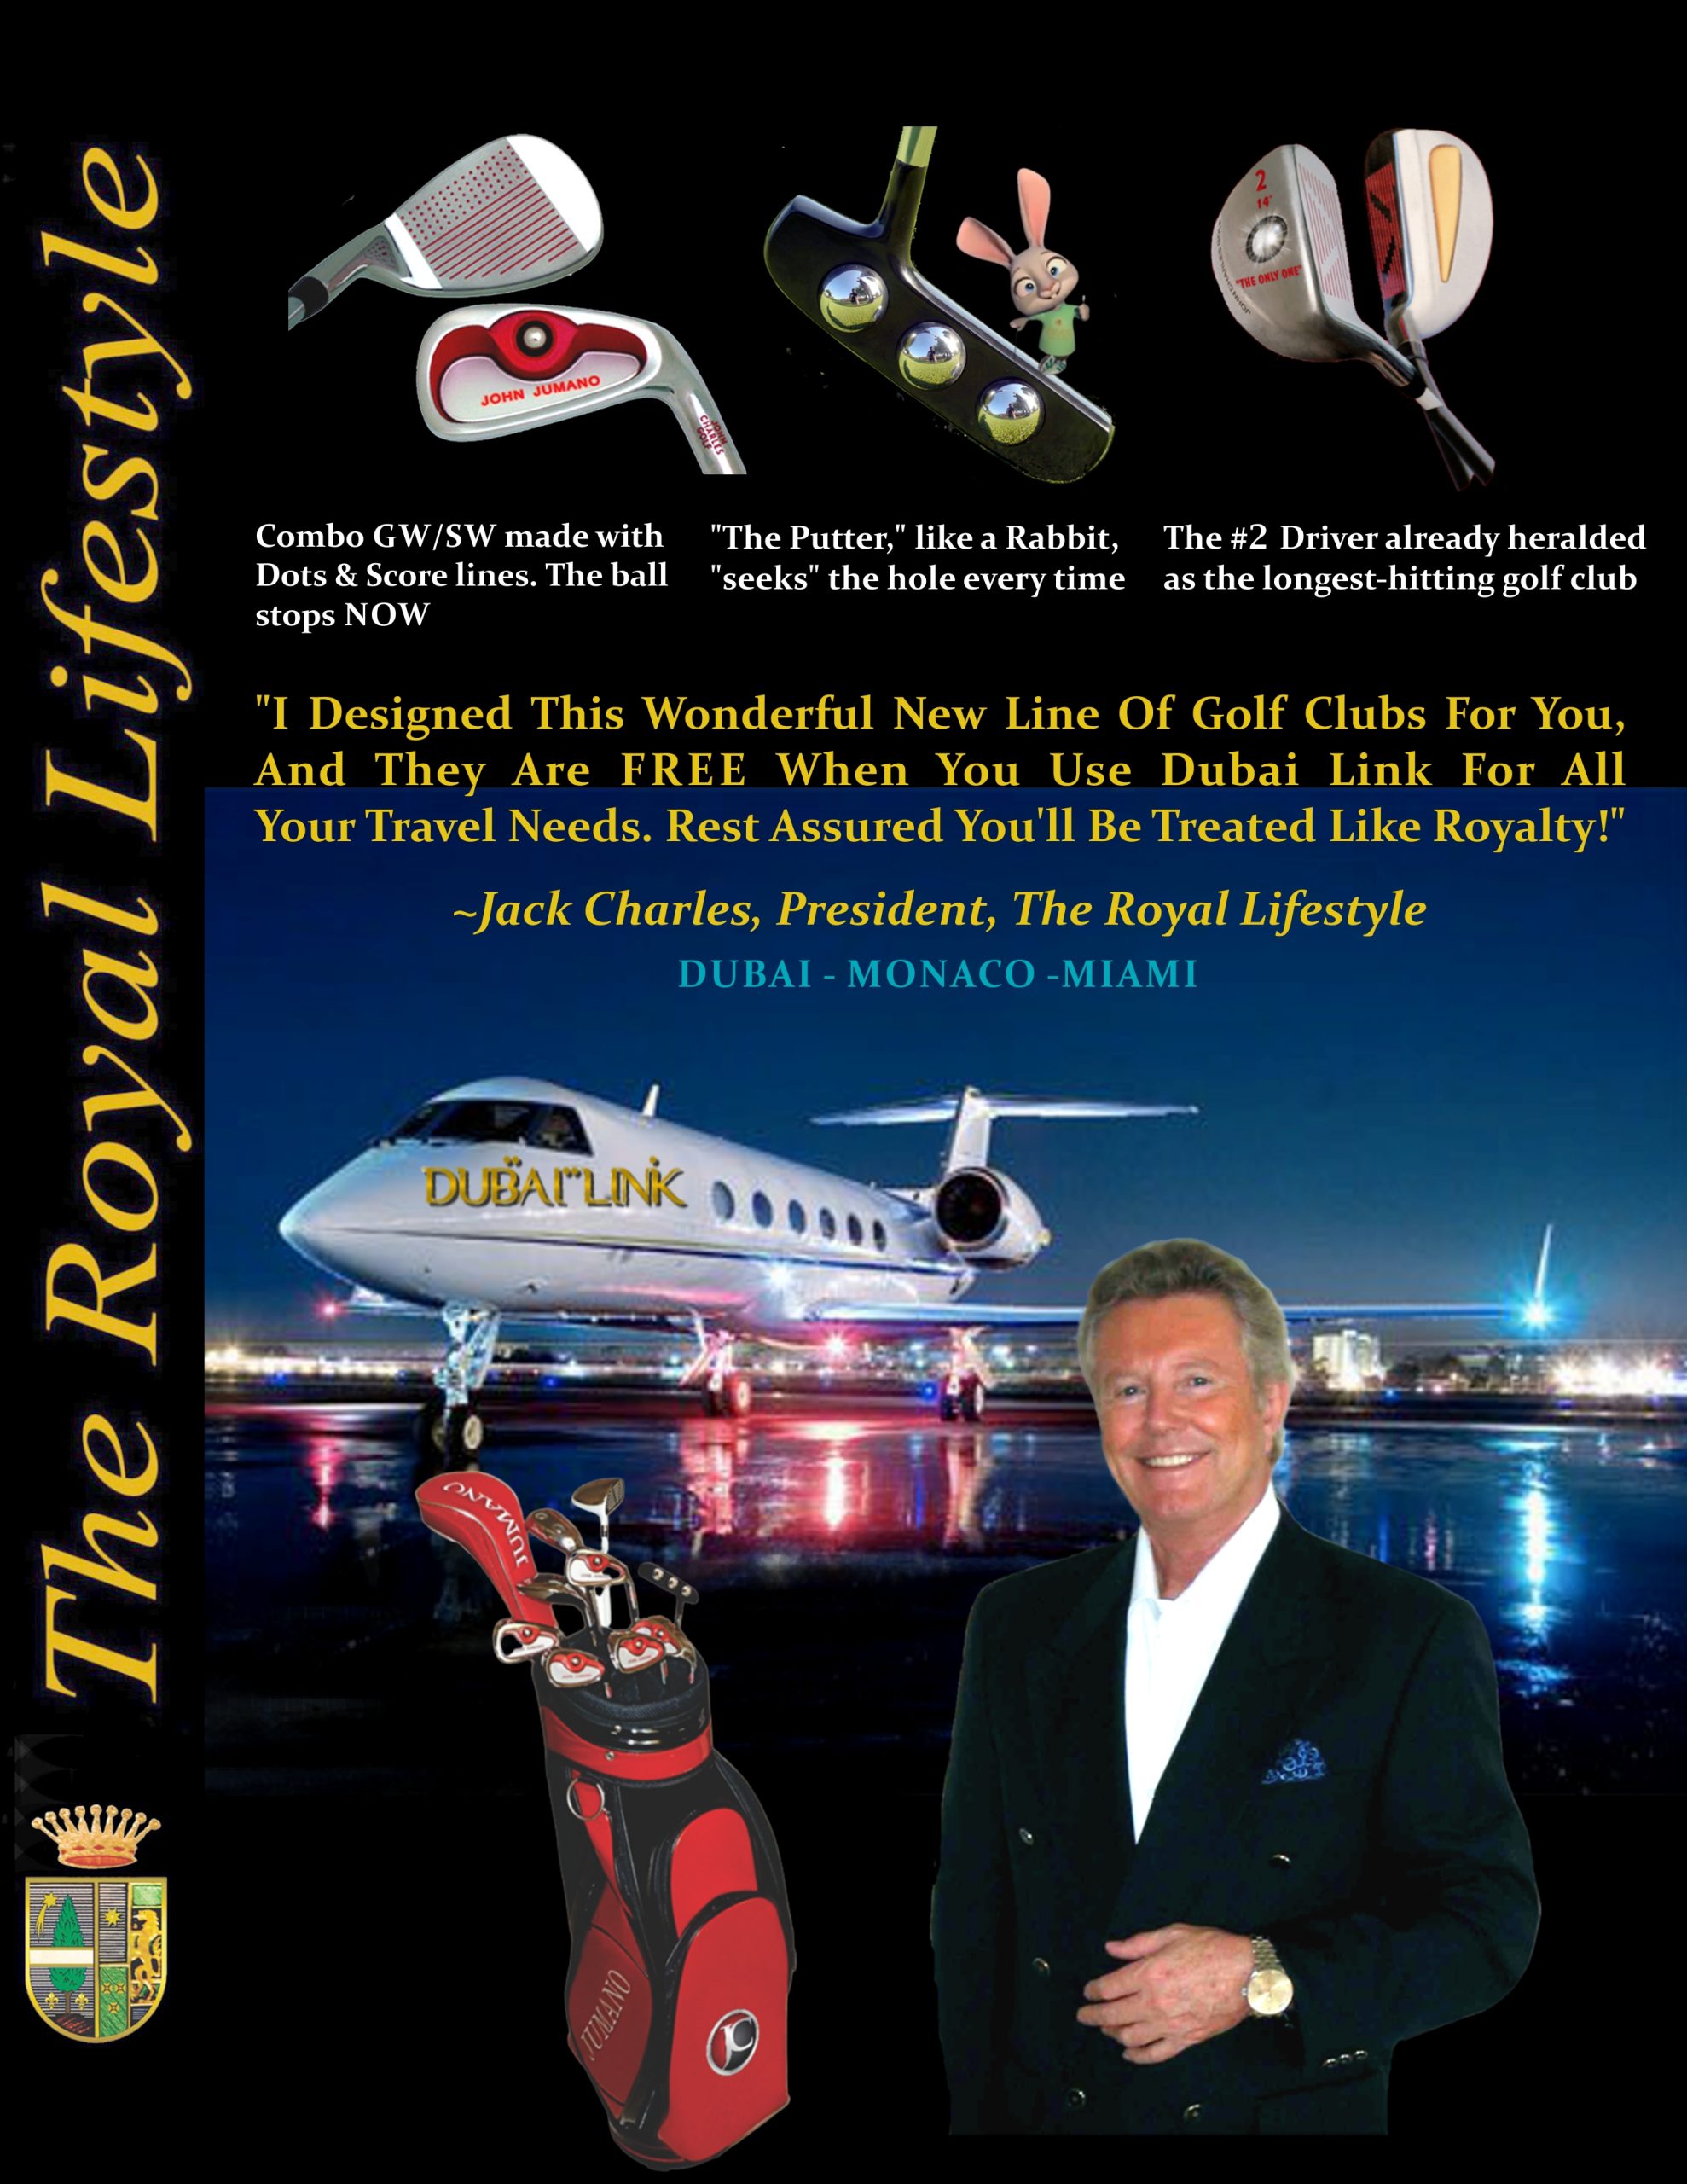 man in front of private jet introducing 3 different golf clubs